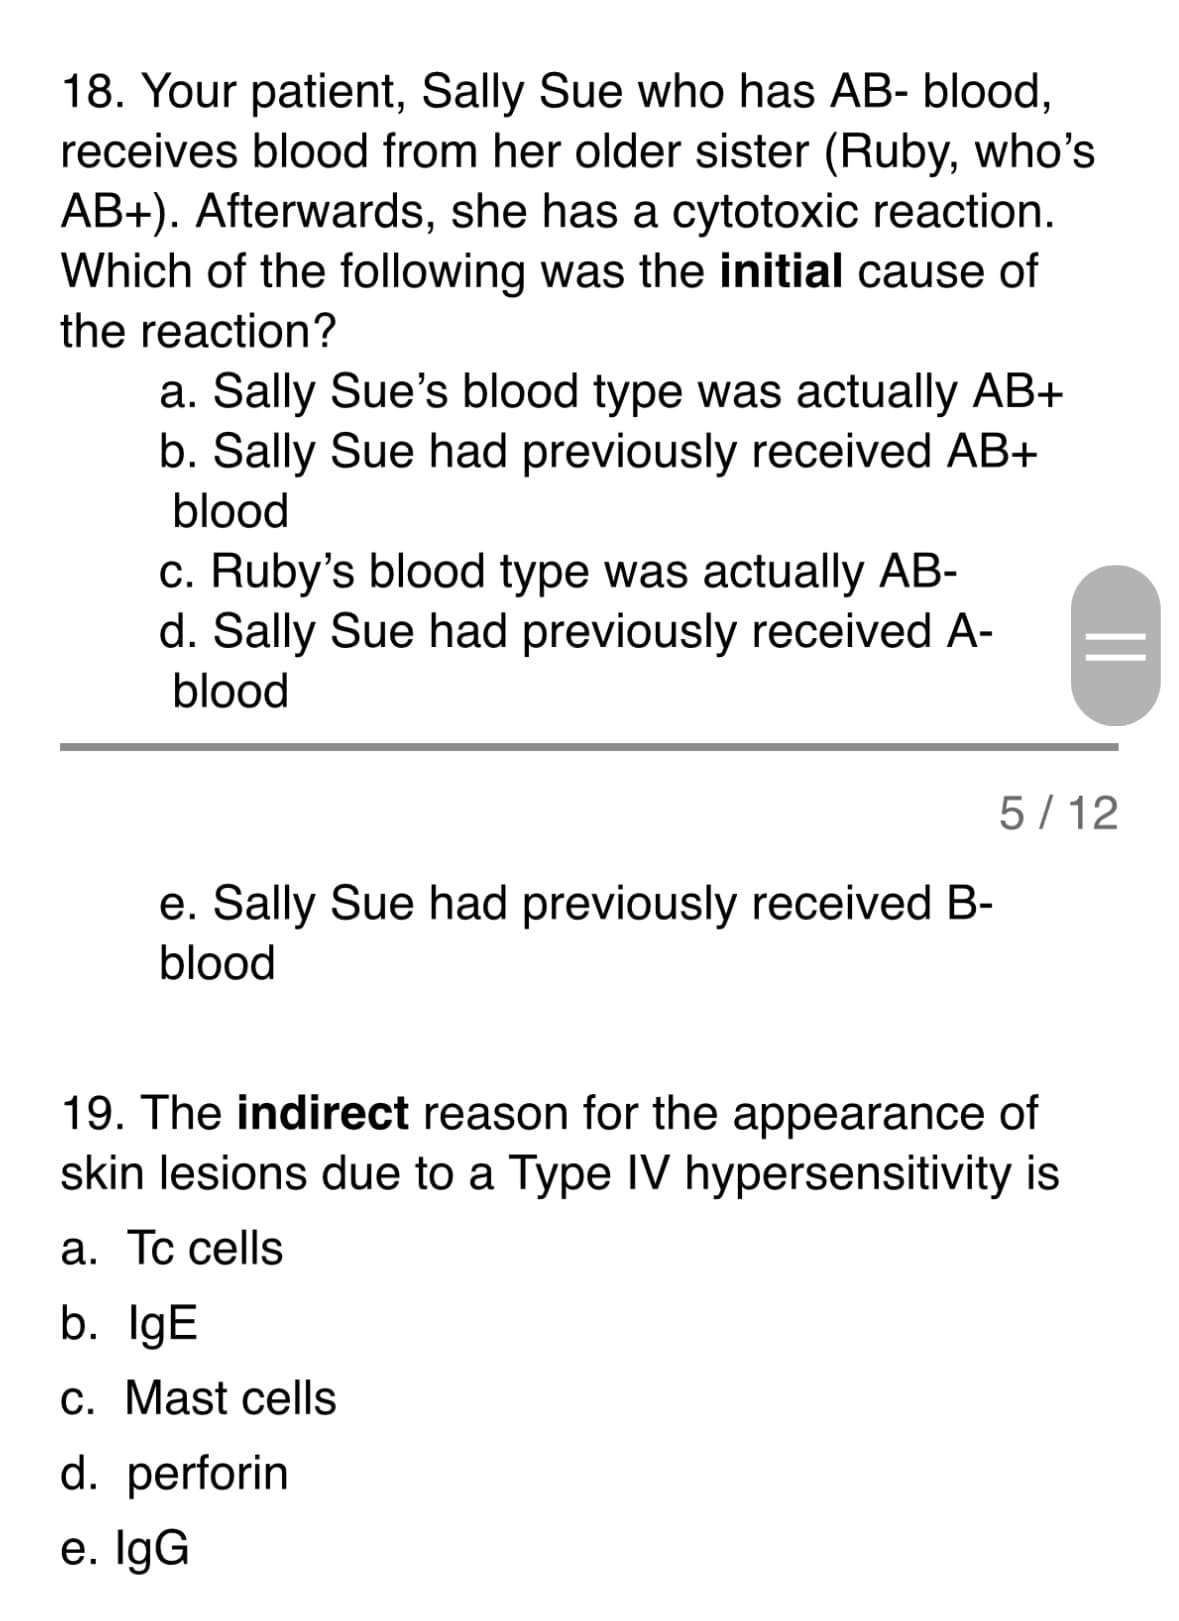 18. Your patient, Sally Sue who has AB- blood,
receives blood from her older sister (Ruby, who's
AB+). Afterwards, she has a cytotoxic reaction.
Which of the following was the initial cause of
the reaction?
a. Sally Sue's blood type was actually AB+
b. Sally Sue had previously received AB+
blood
c. Ruby's blood type was actually AB-
d. Sally Sue had previously received A-
blood
e. Sally Sue had previously received B-
blood
19. The indirect reason for the appearance of
skin lesions due to a Type IV hypersensitivity is
a. Tc cells
b. IgE
c. Mast cells
d. perforin
e. IgG
||
5/12